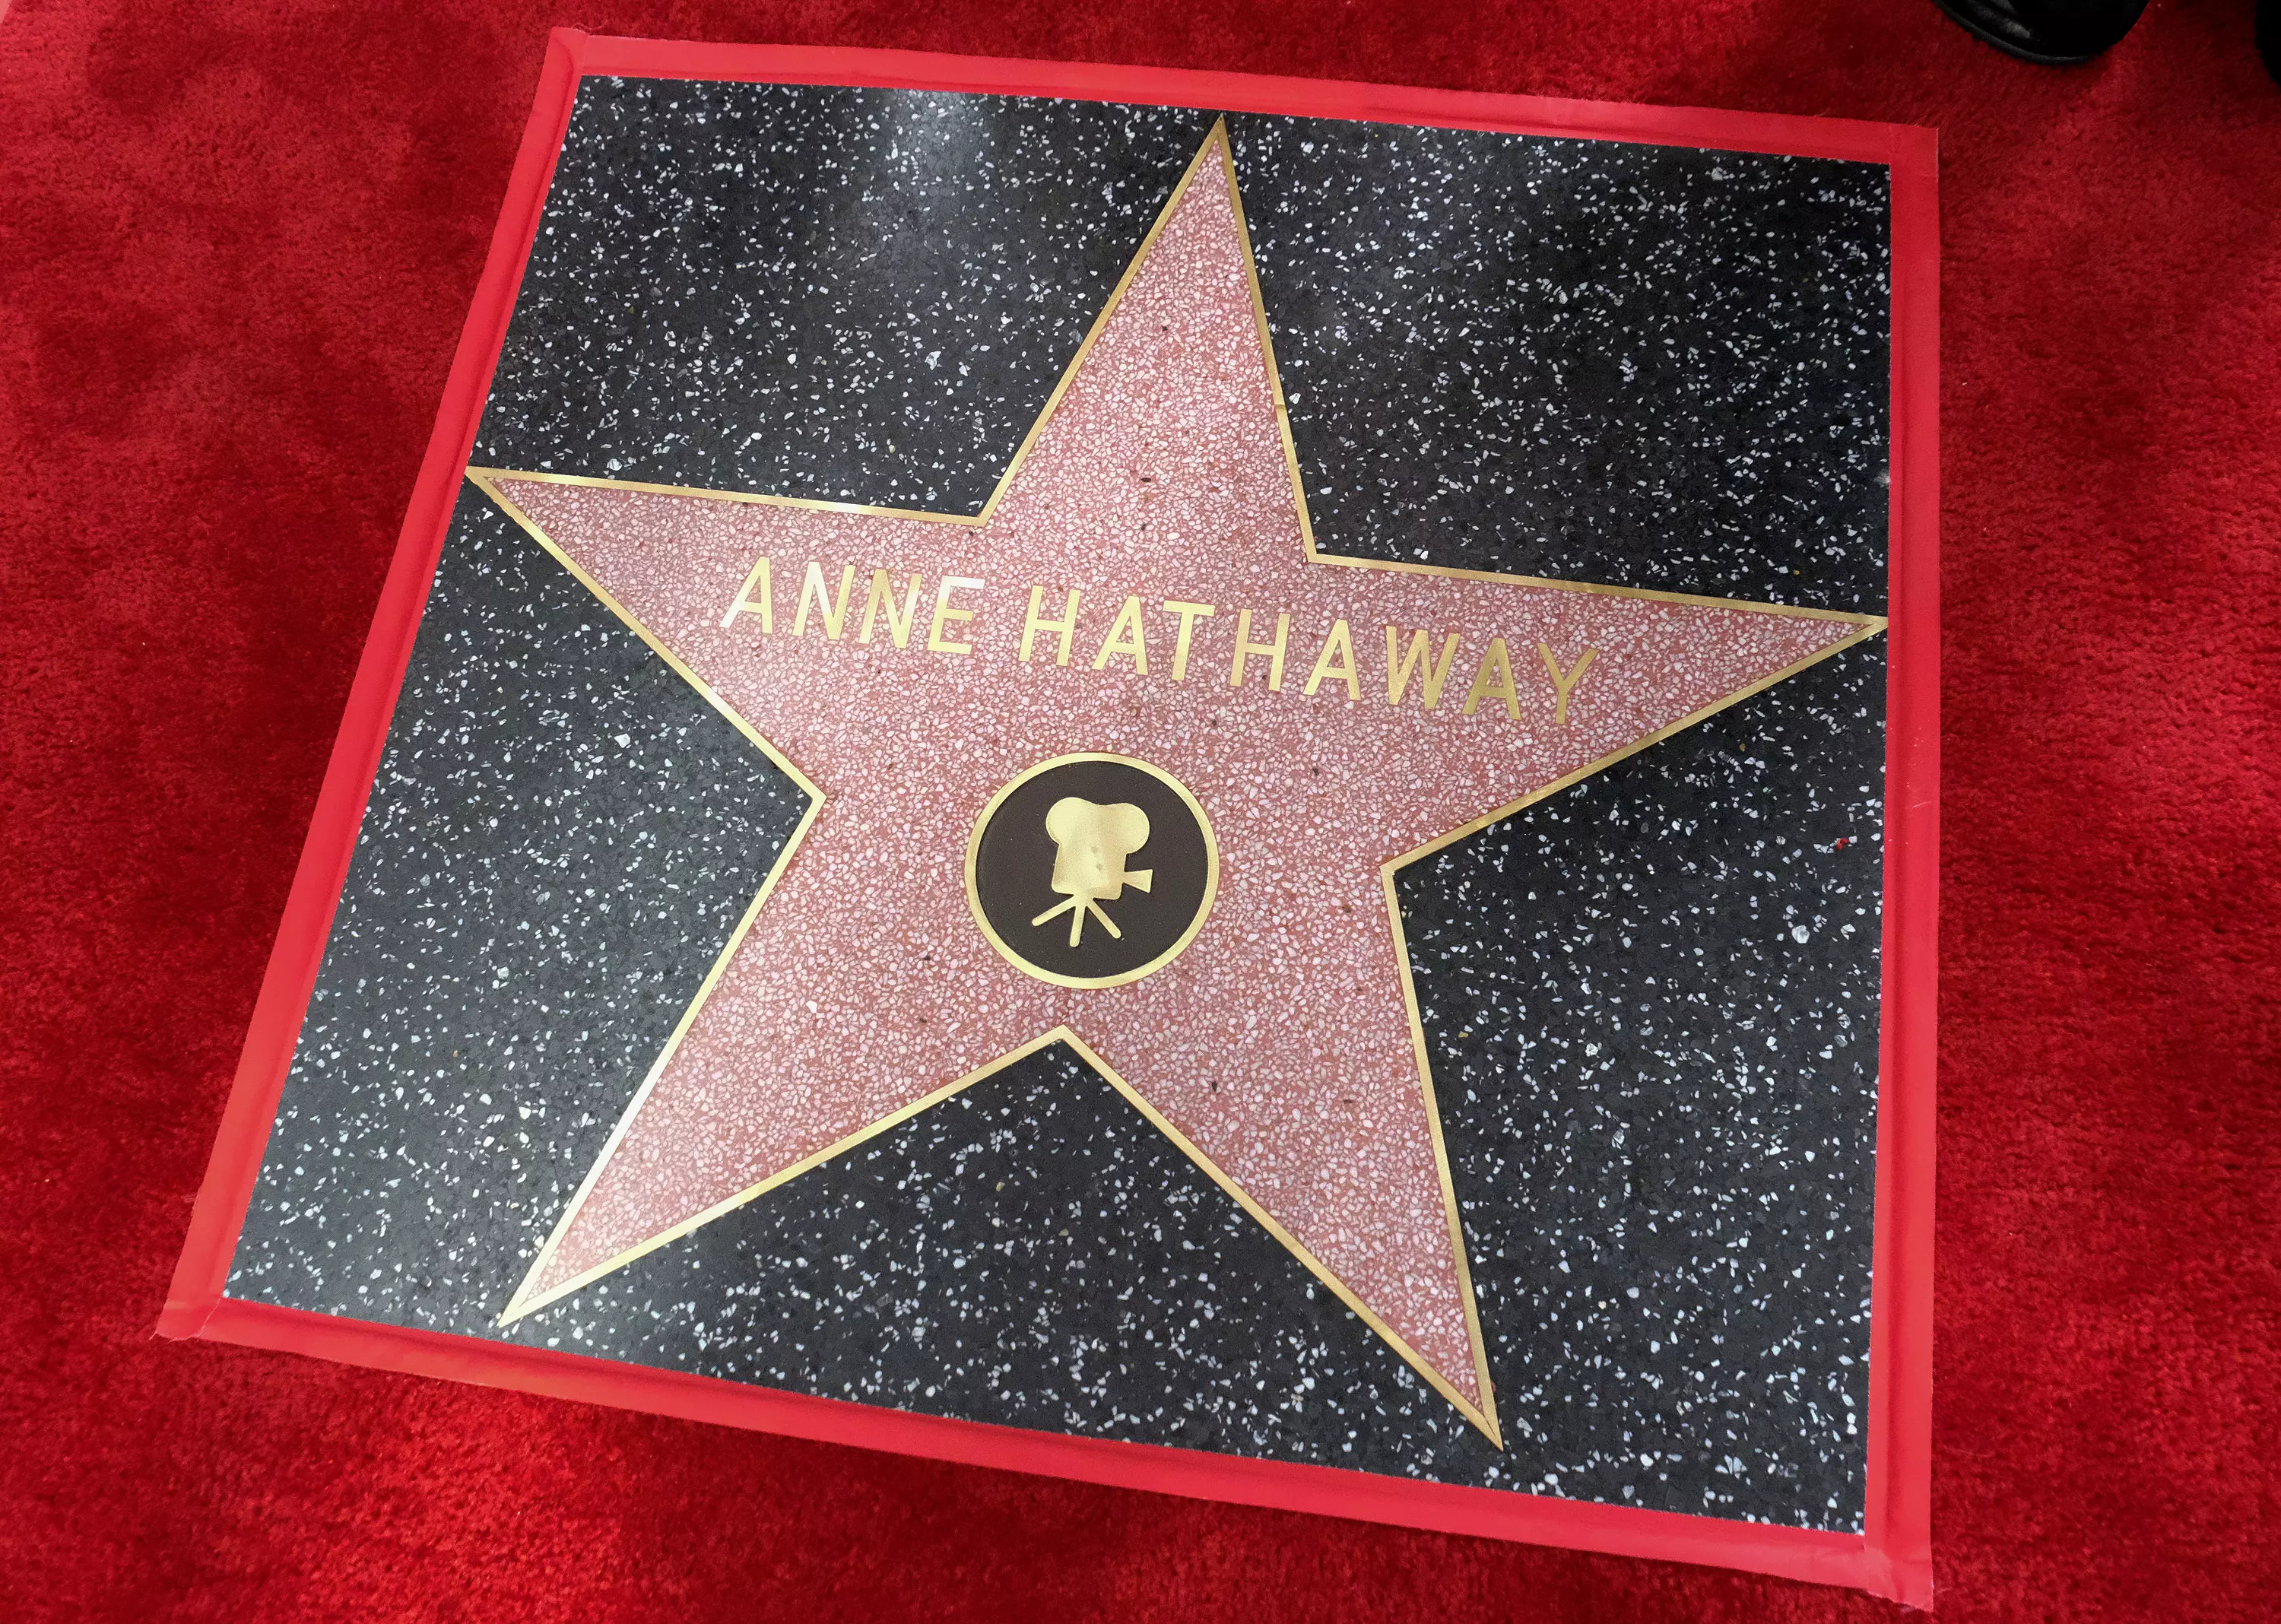 Hathaway has been honoured with a star on the Hollywood Walk of Fame.